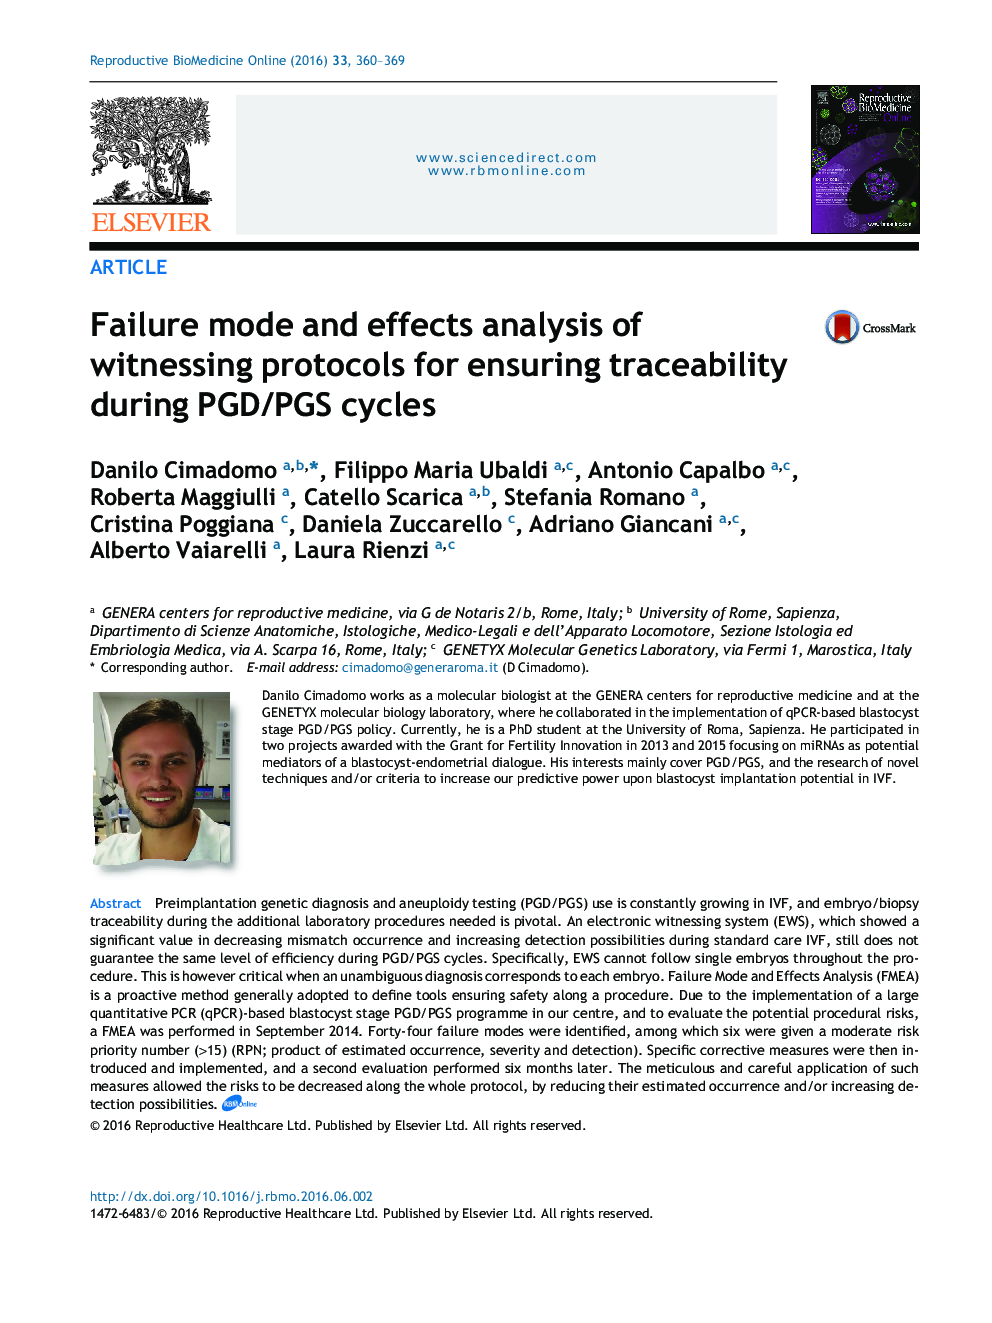 Failure mode and effects analysis of witnessing protocols for ensuring traceability during PGD/PGS cycles